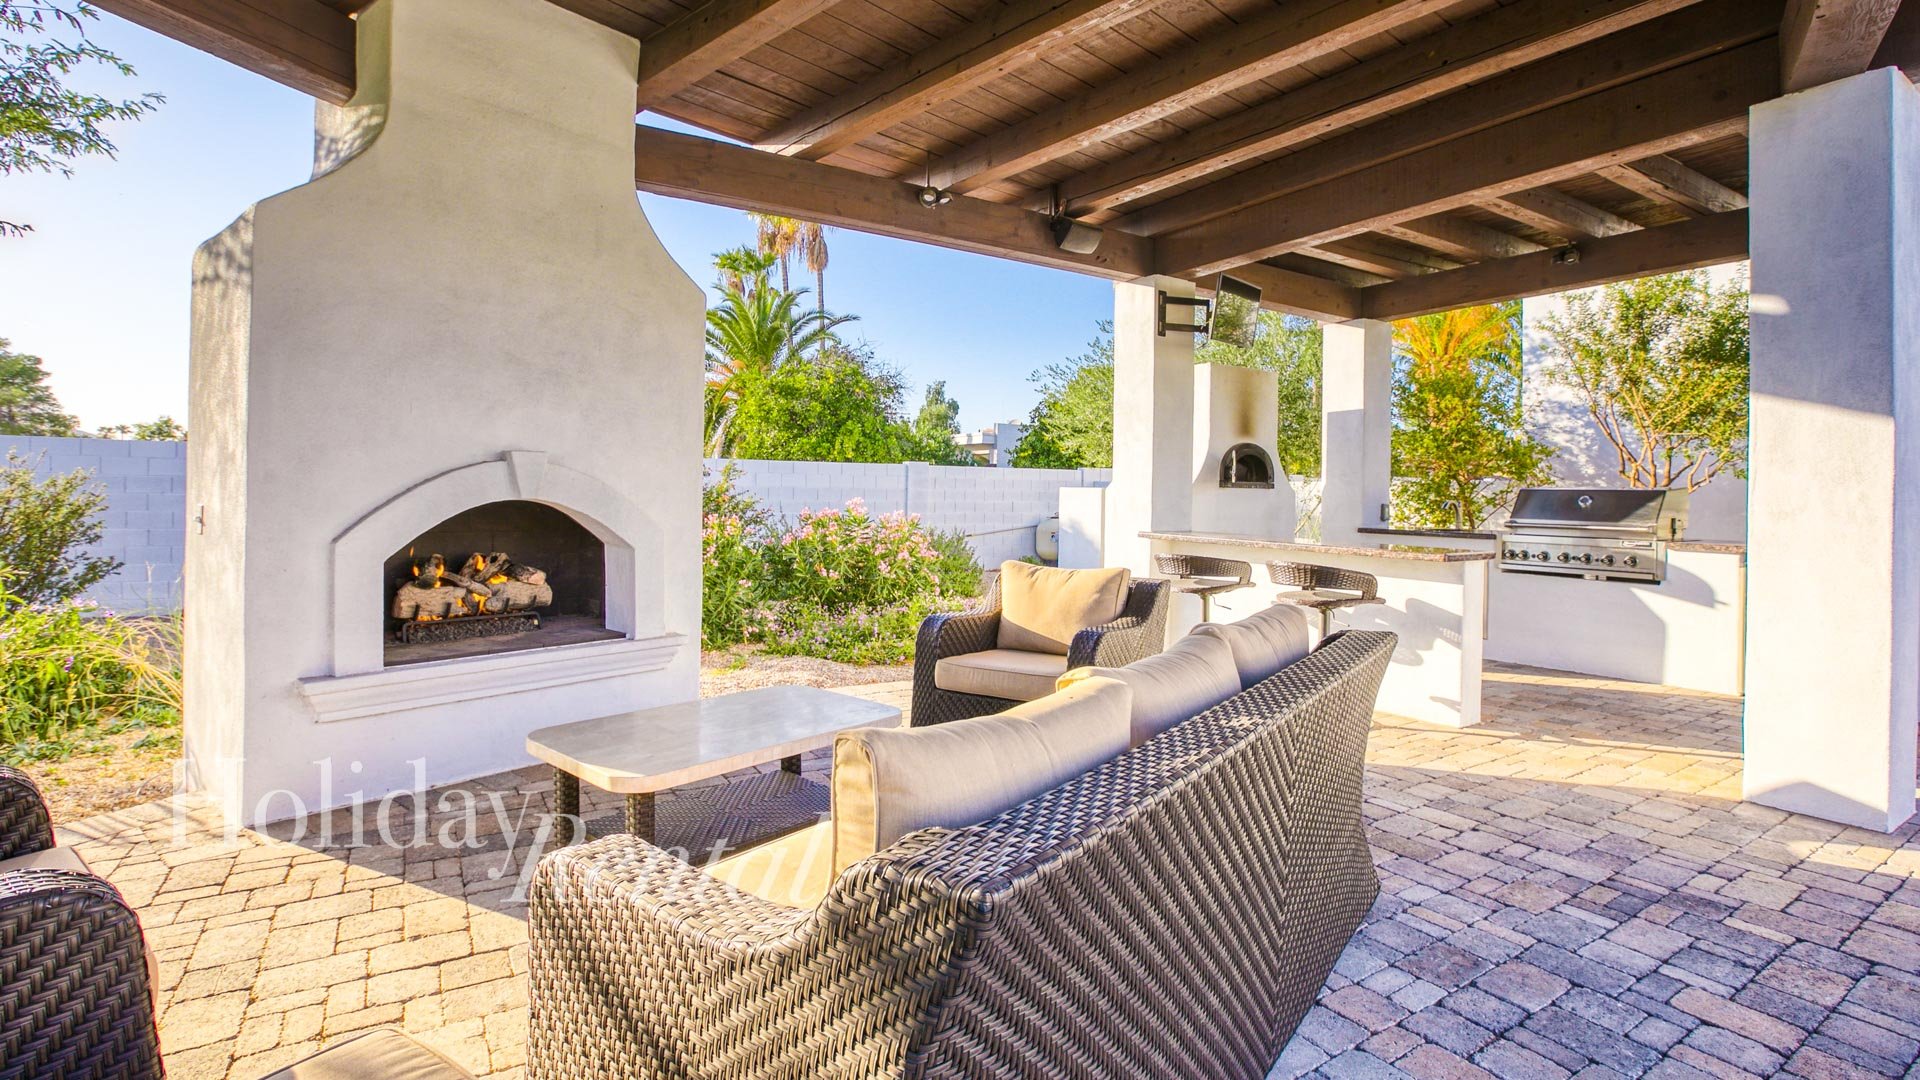 Covered seating area with outdoor fireplace and built-in grill